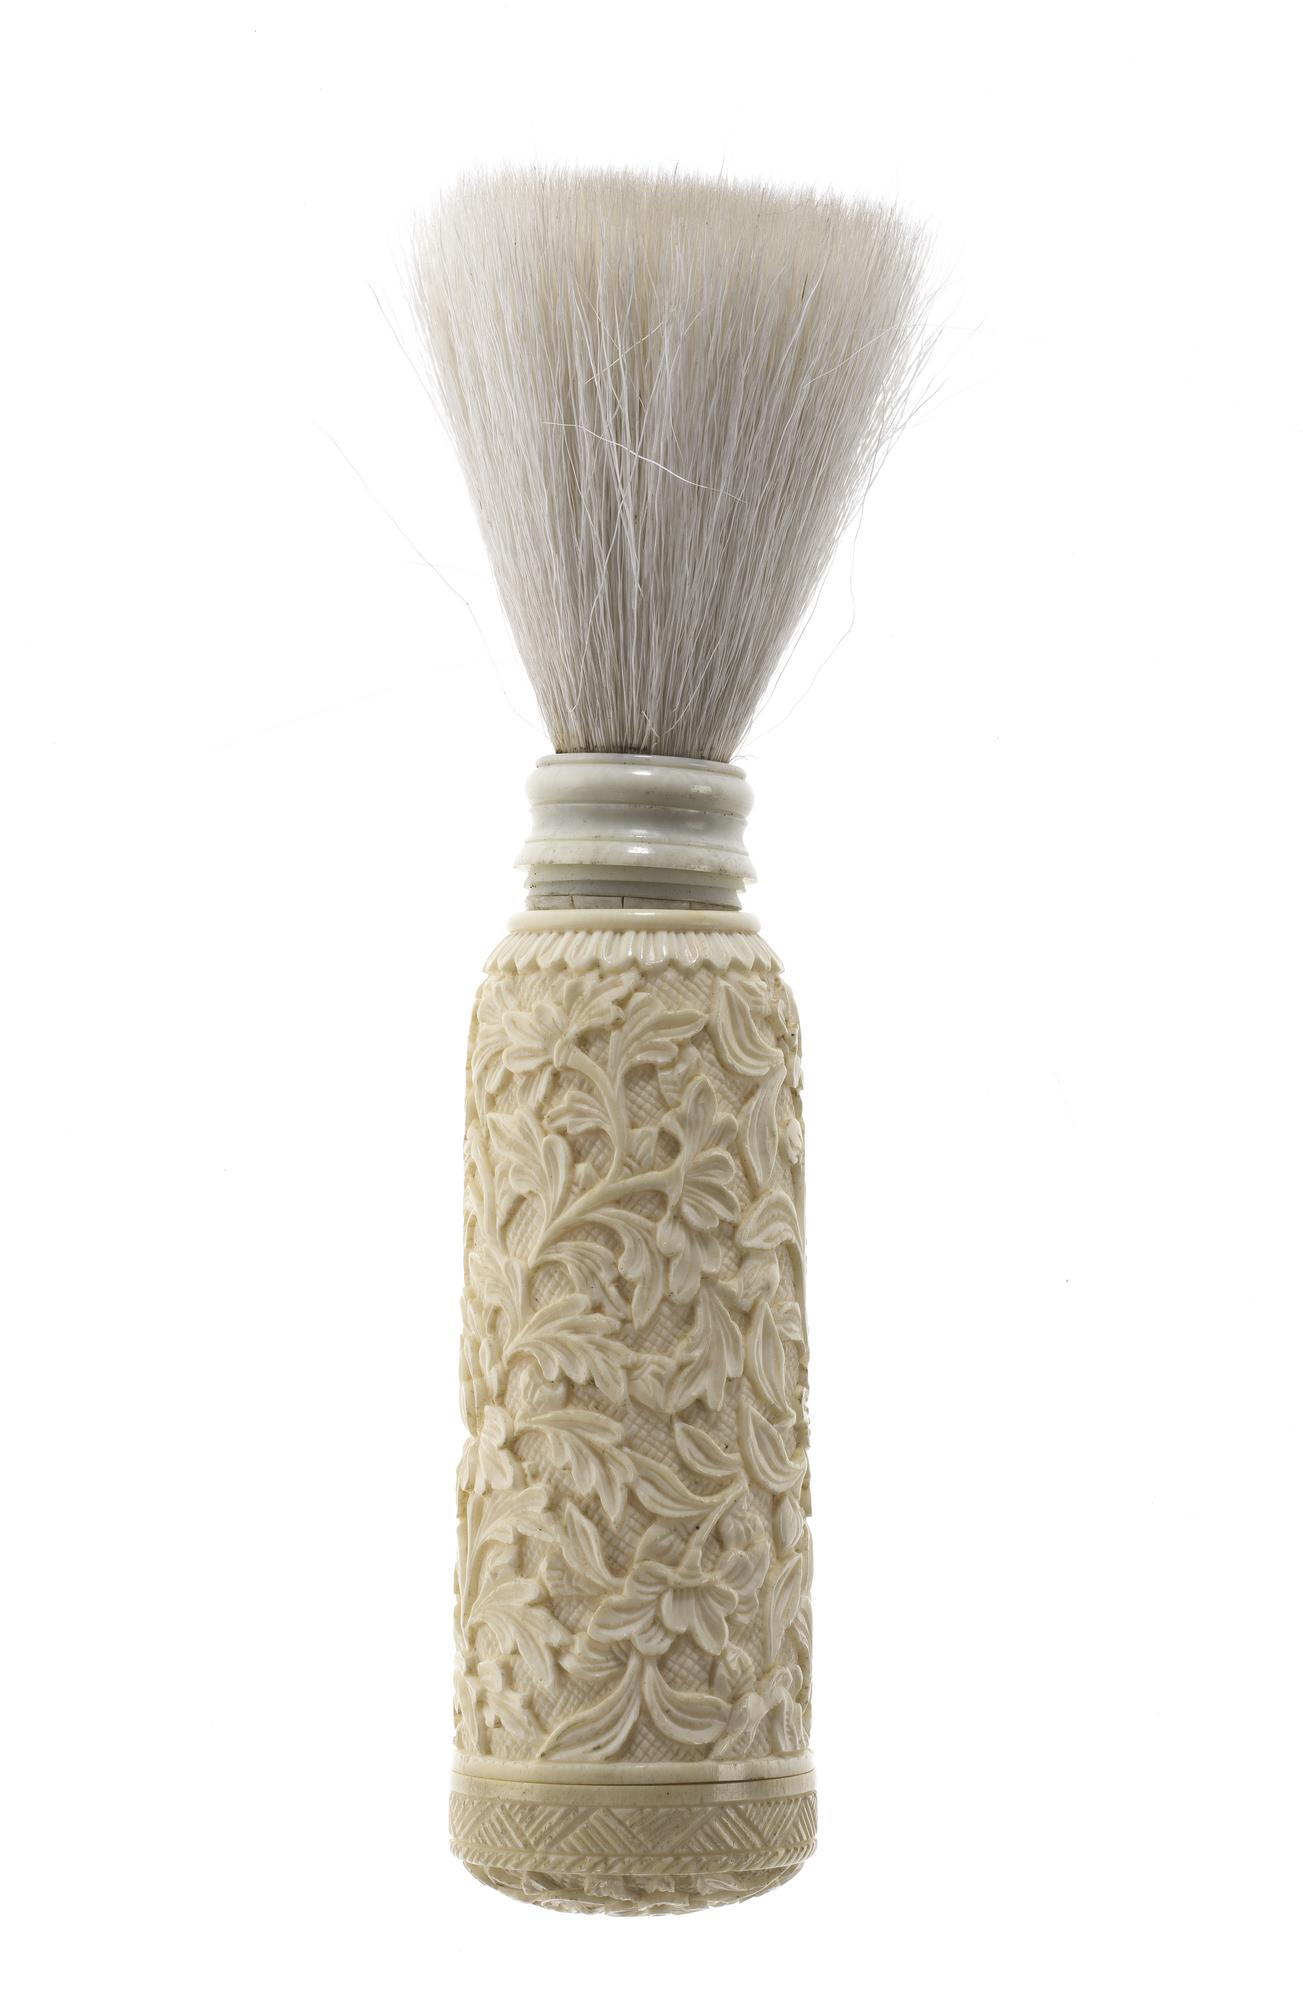 Shaving-brush case of ivory, roughly cylindrical and carved in relief with birds, flowers and foliage: China, 19th century AD.